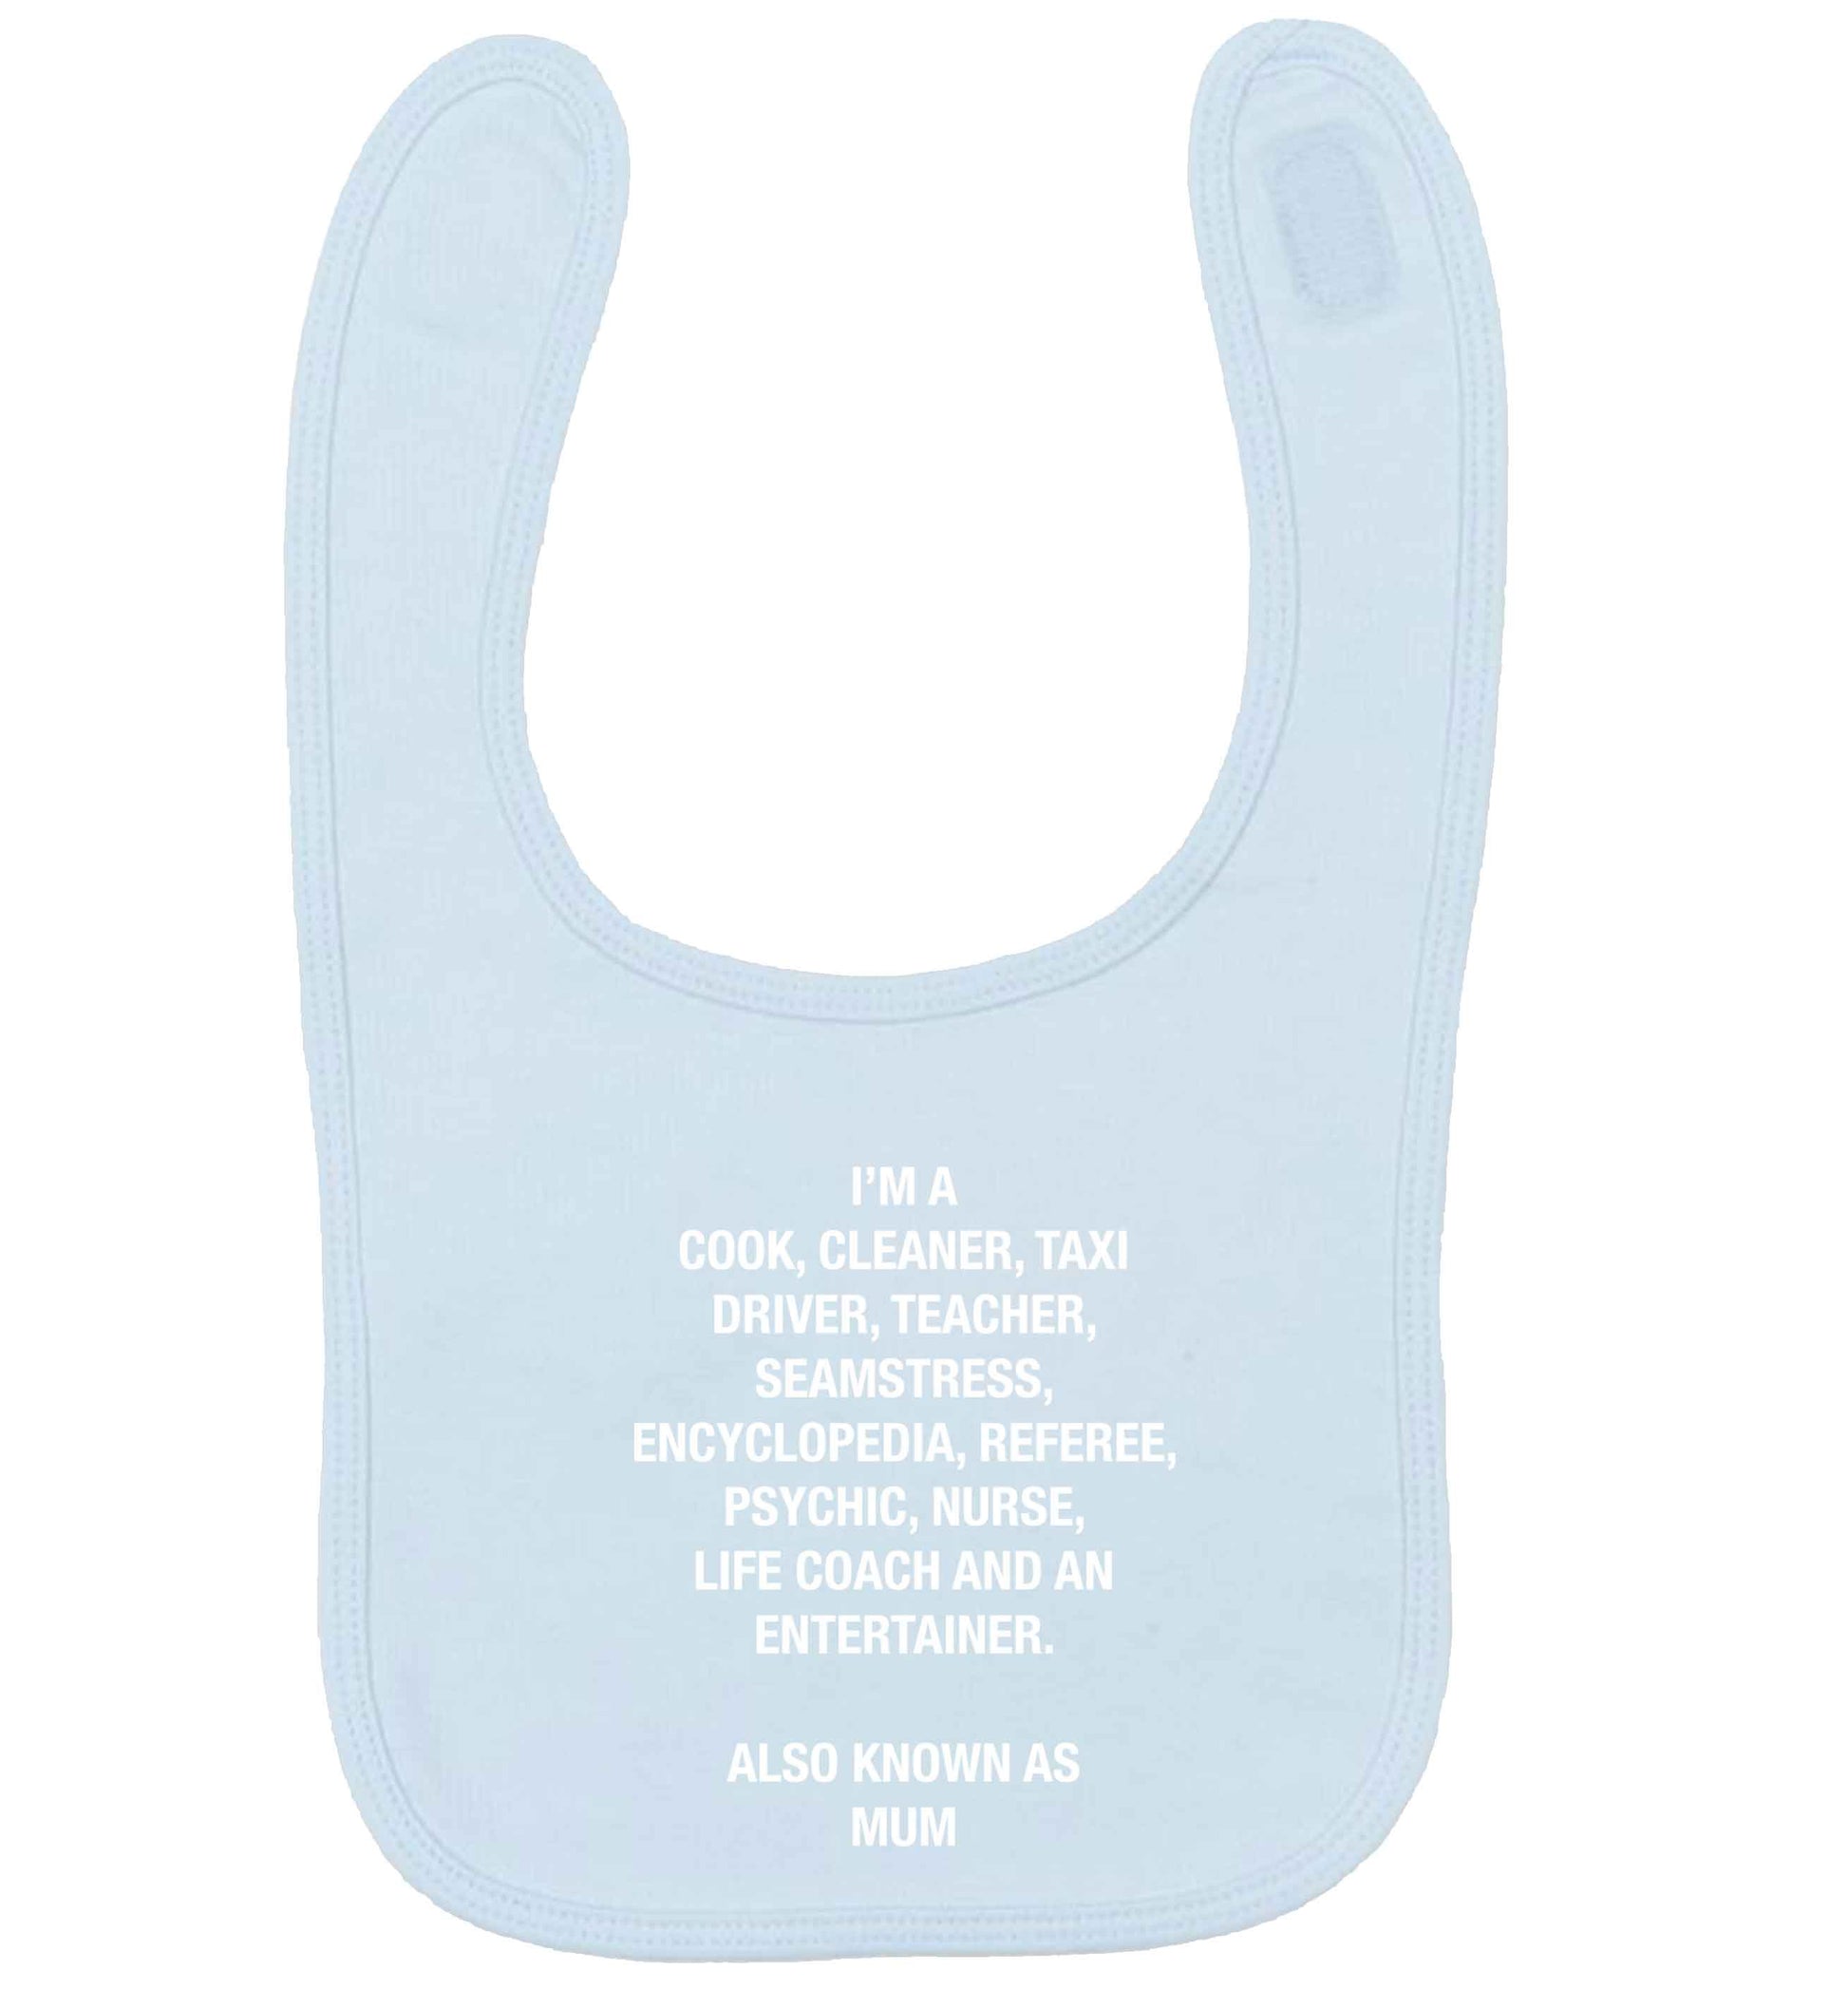 Funny gifts for your mum on mother's dayor her birthday! Mum, cook, cleaner, taxi driver, teacher, seamstress, encyclopedia, referee, psychic, nurse, life coach and entertainer pale blue baby bib